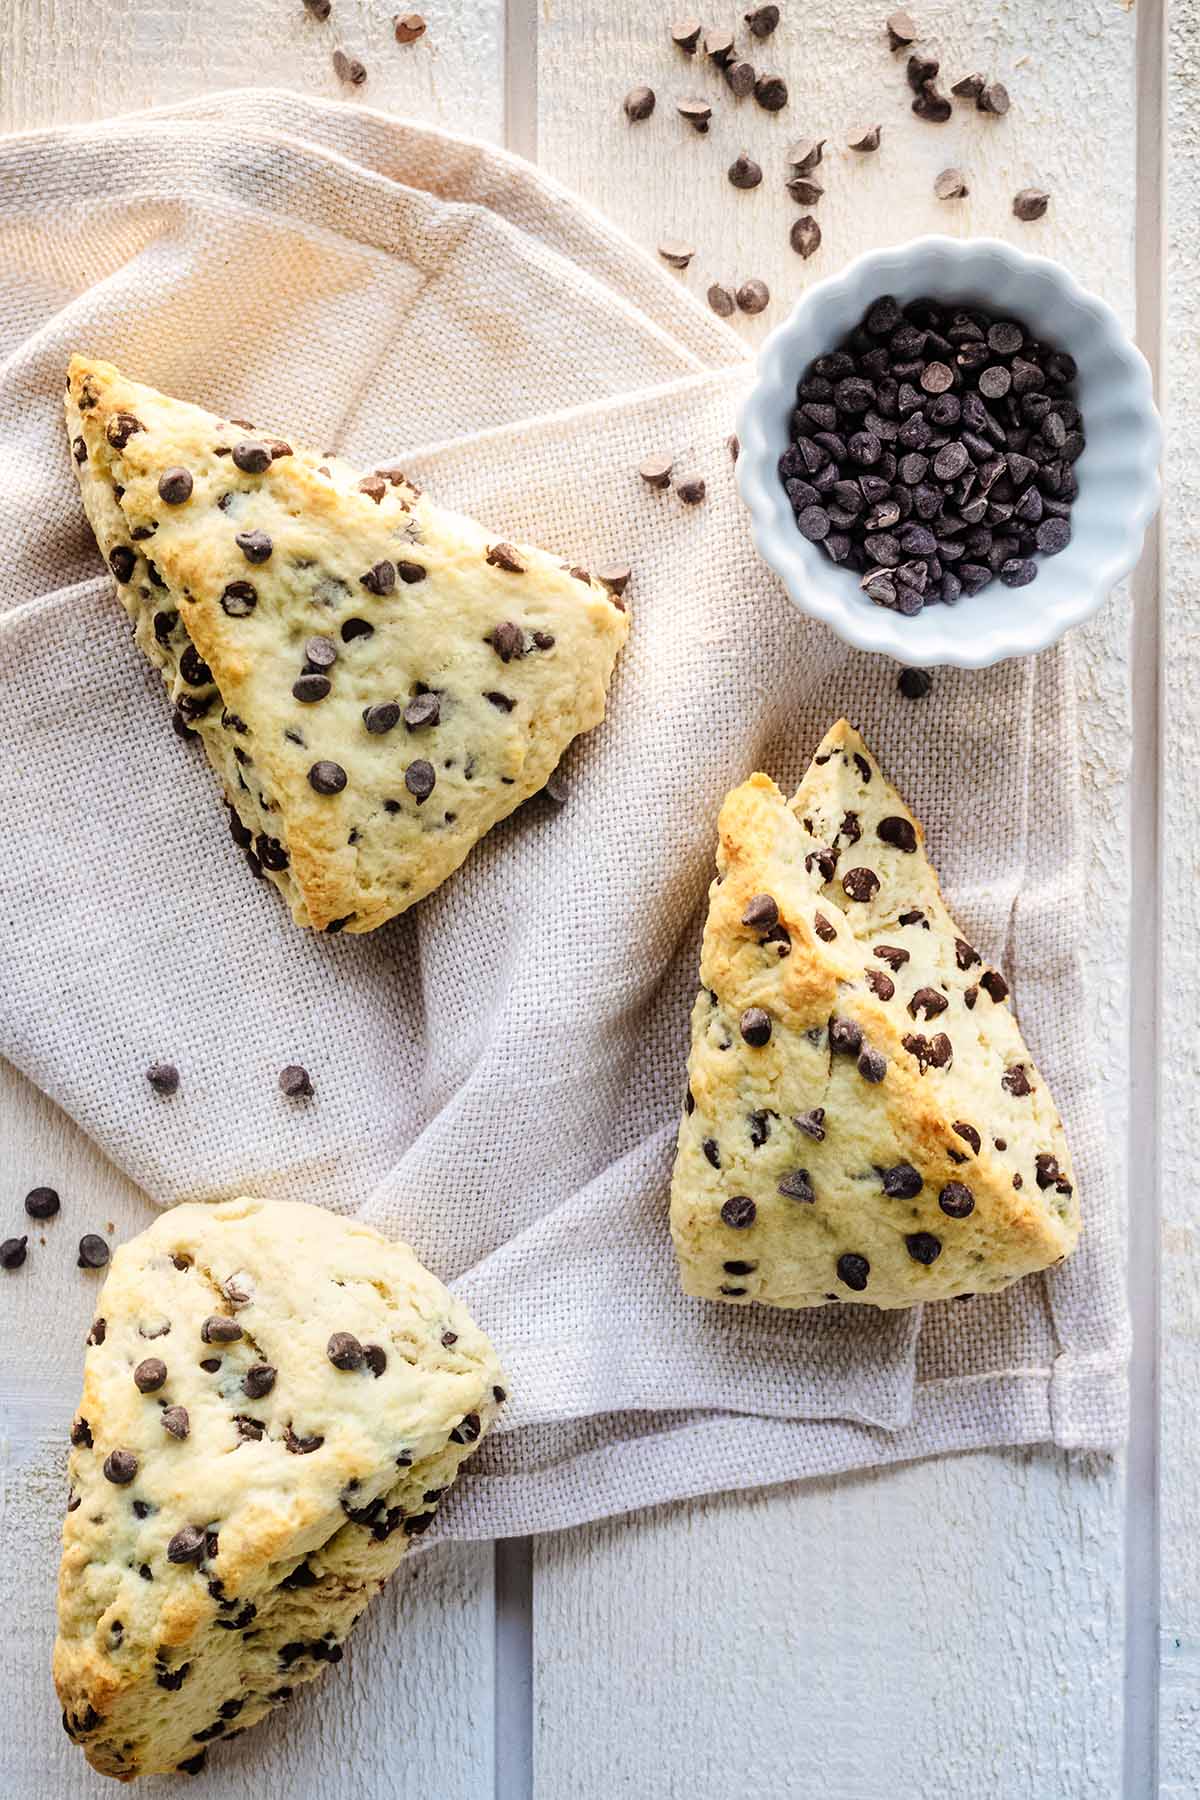 Overhead view of 3 chocolate chip scones on a cream napkin on a white wood background with a small white bowl filled with chocolate chips